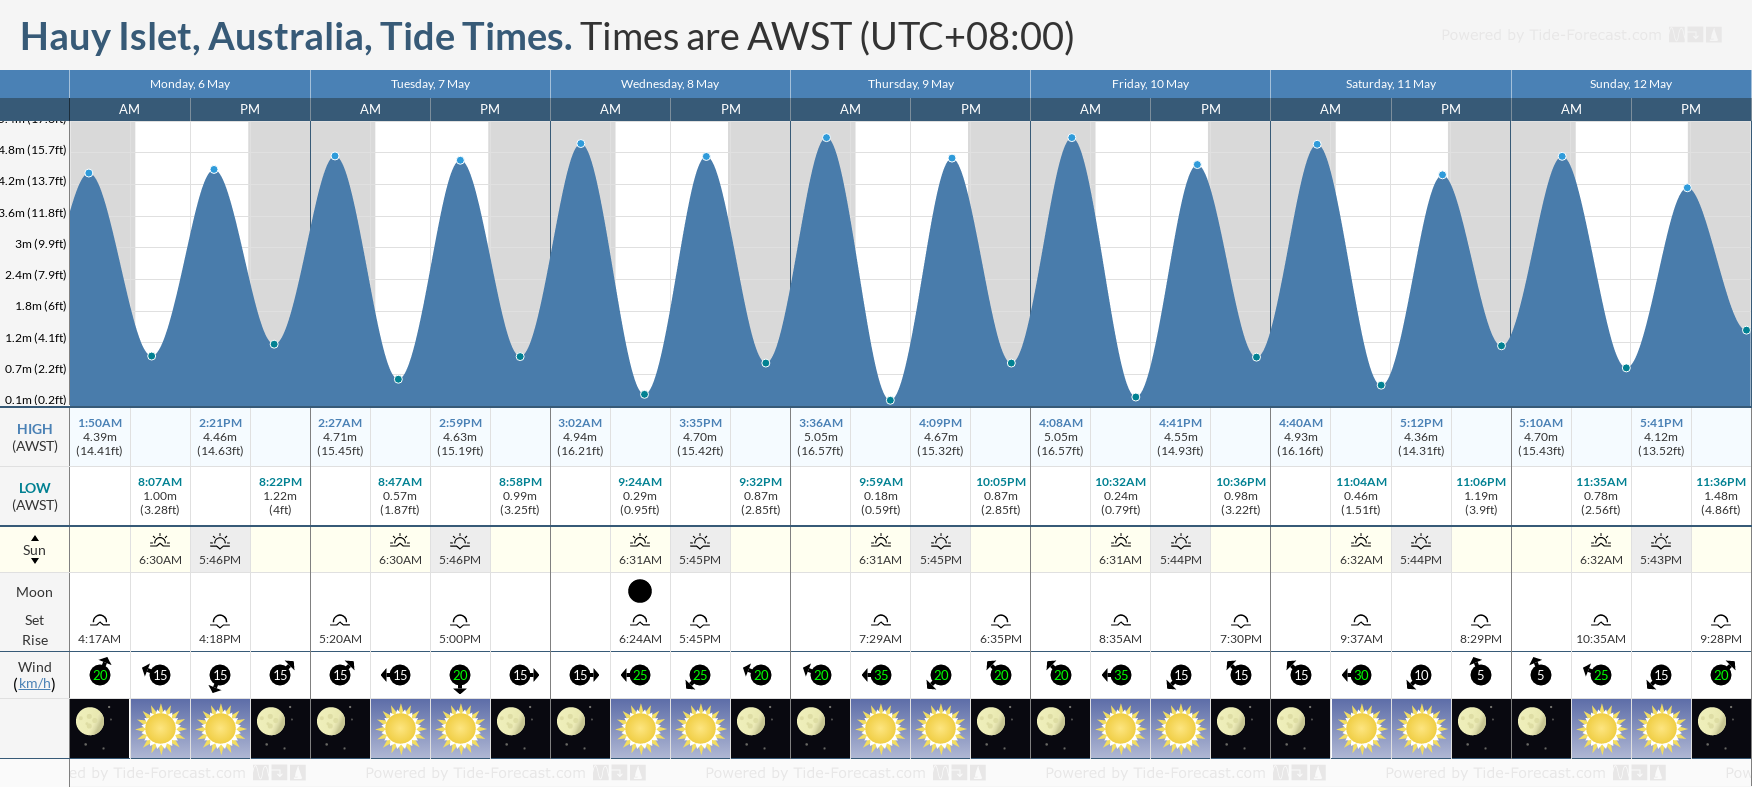 Hauy Islet, Australia Tide Chart including high and low tide tide times for the next 7 days